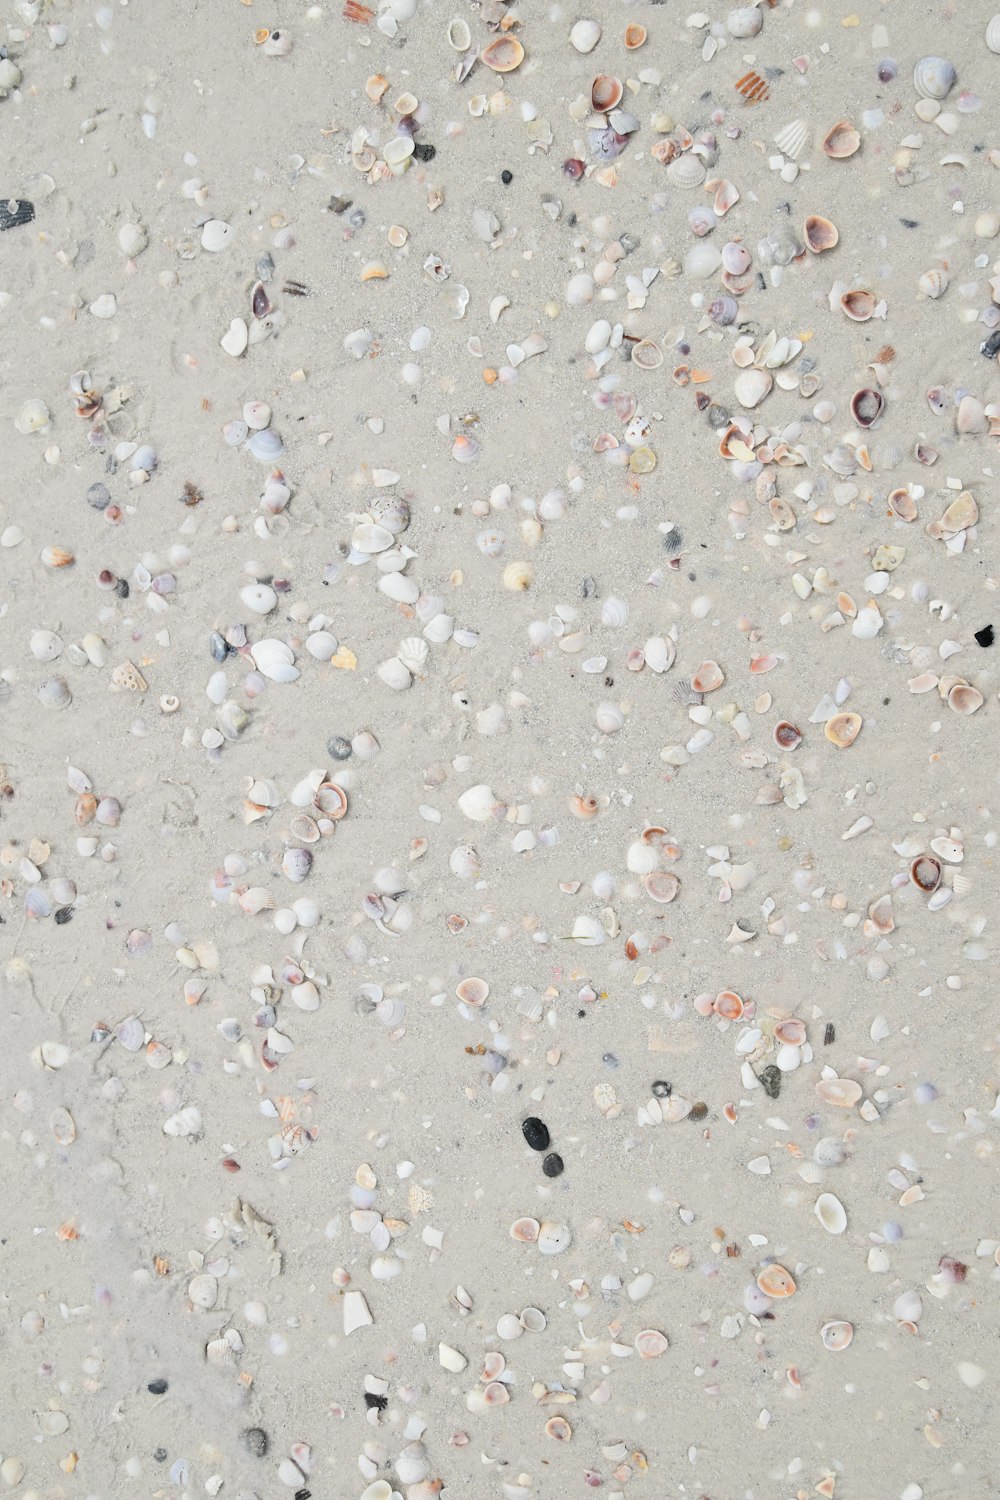 a close up of shells and sand on a beach